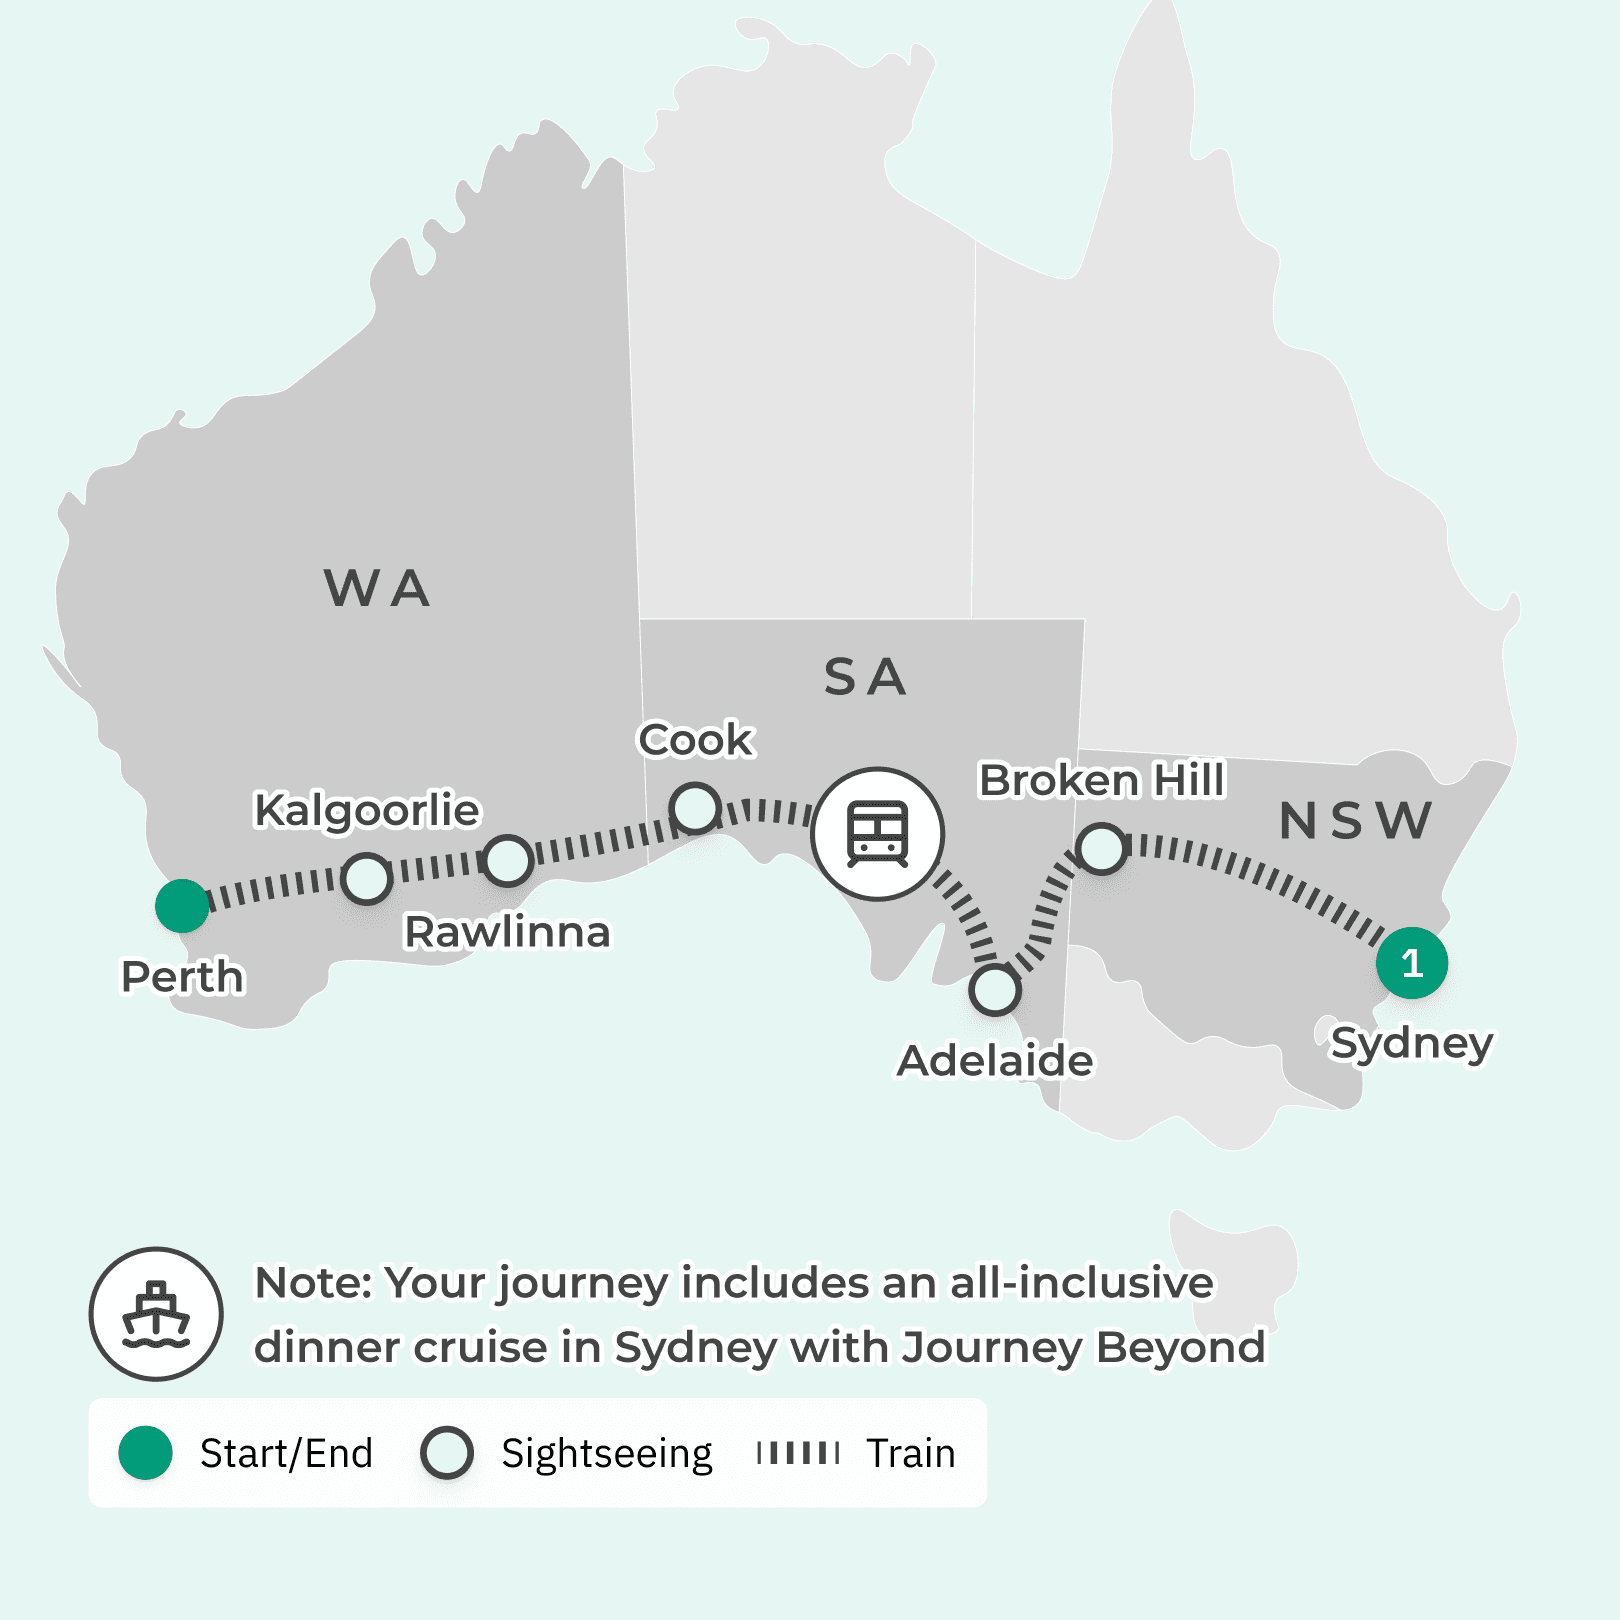 Sydney to Perth: Indian Pacific Rail Journey with Vivid Dinner Cruise, Off-Train Experiences & All-Inclusive On-Train Dining route map